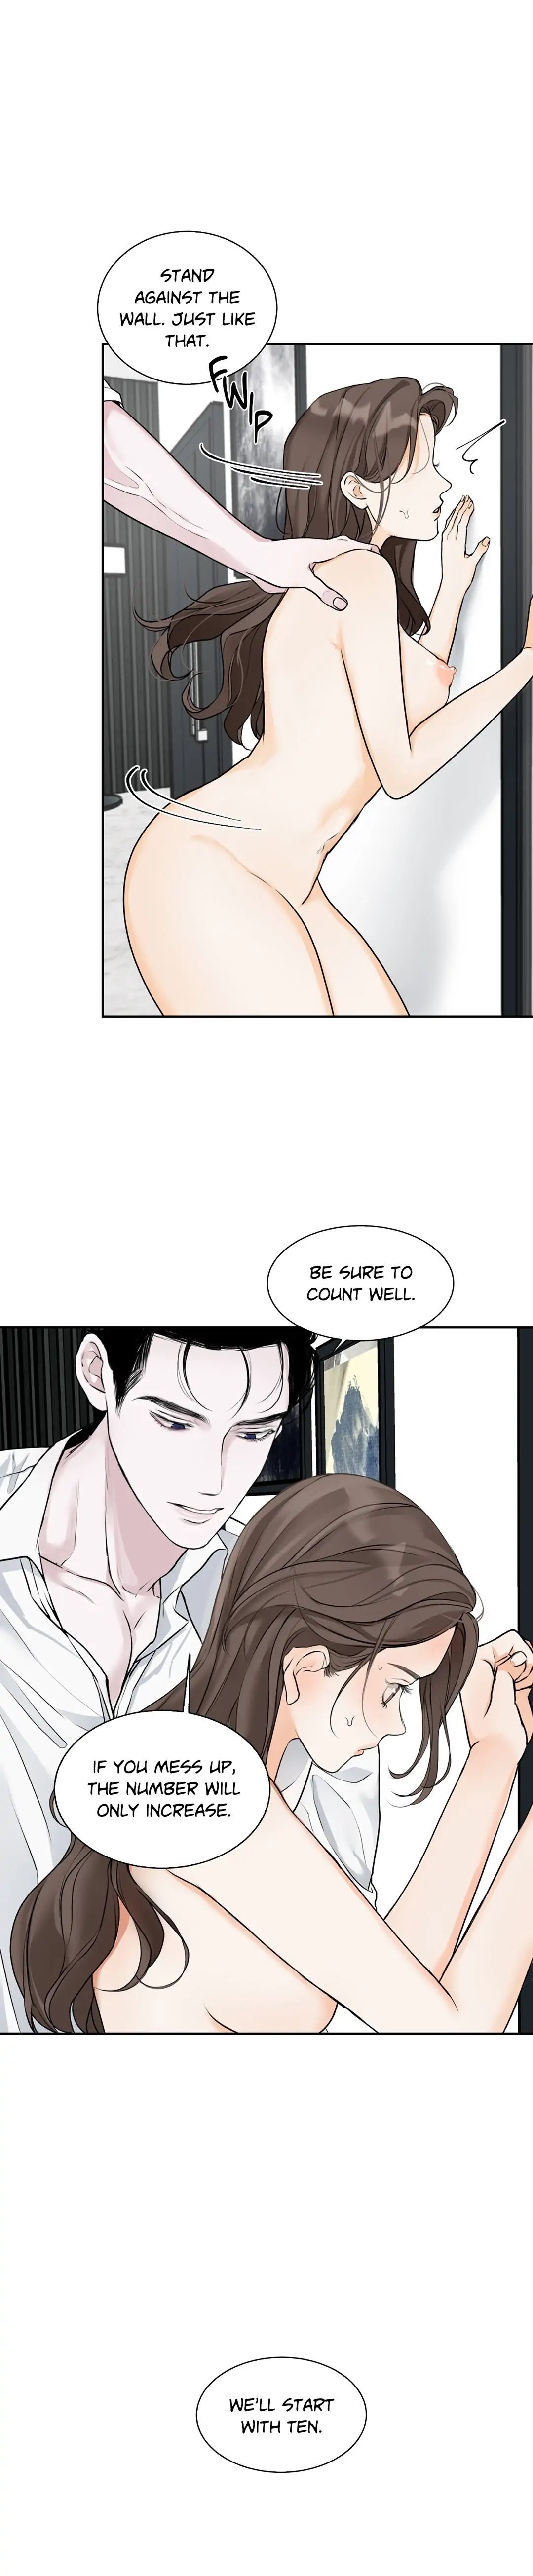 the-men-in-my-bed-chap-8-5